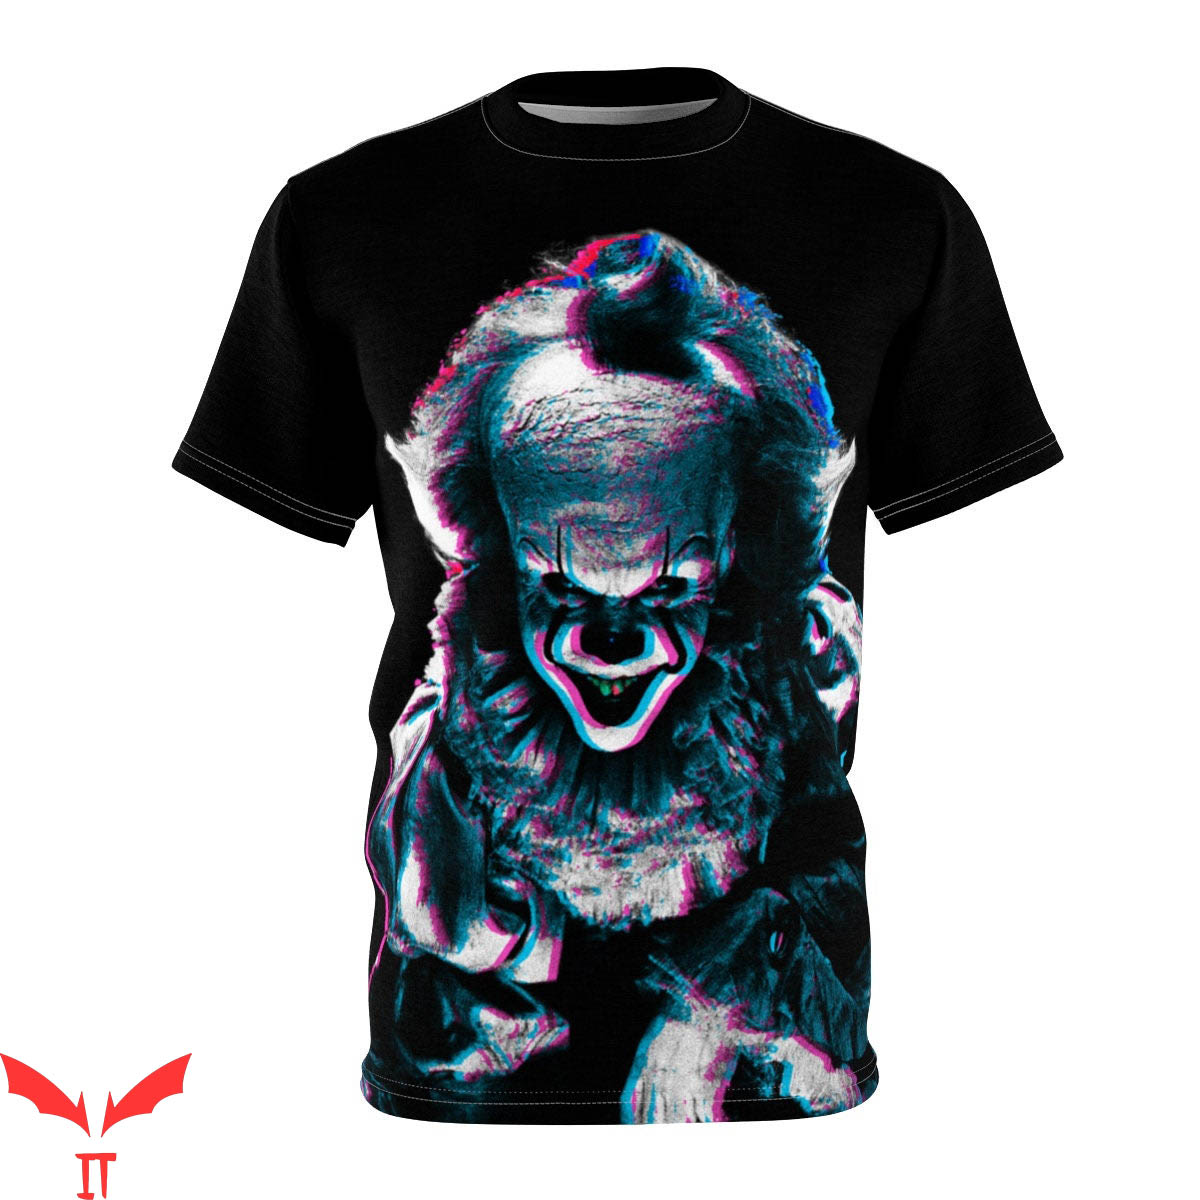 IT The Clown T-Shirt Popcorn Pennywise Clown Scary Movie